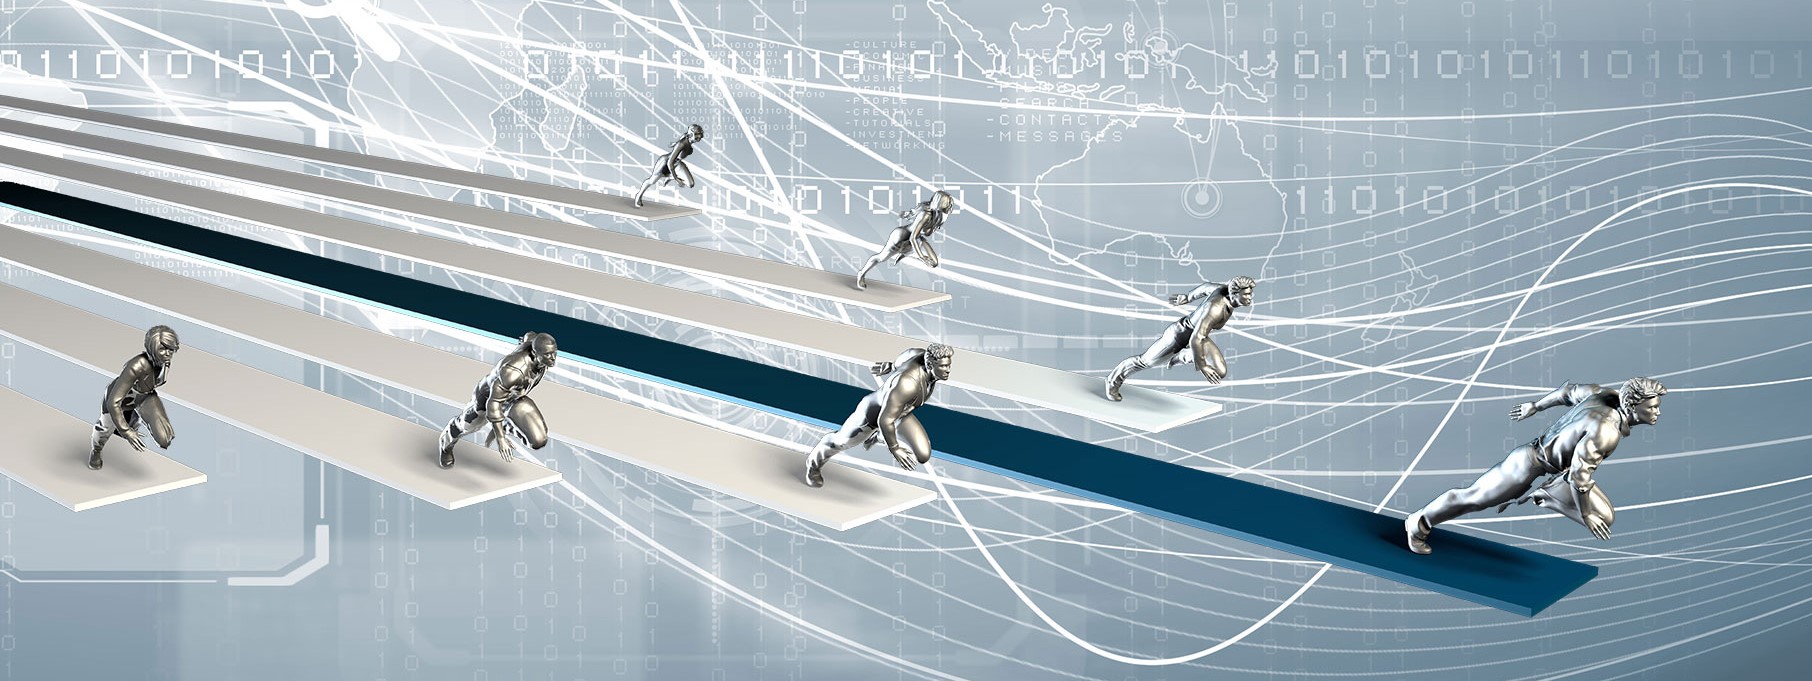 A cyber graphic showing silver figures racing with coding in the background.